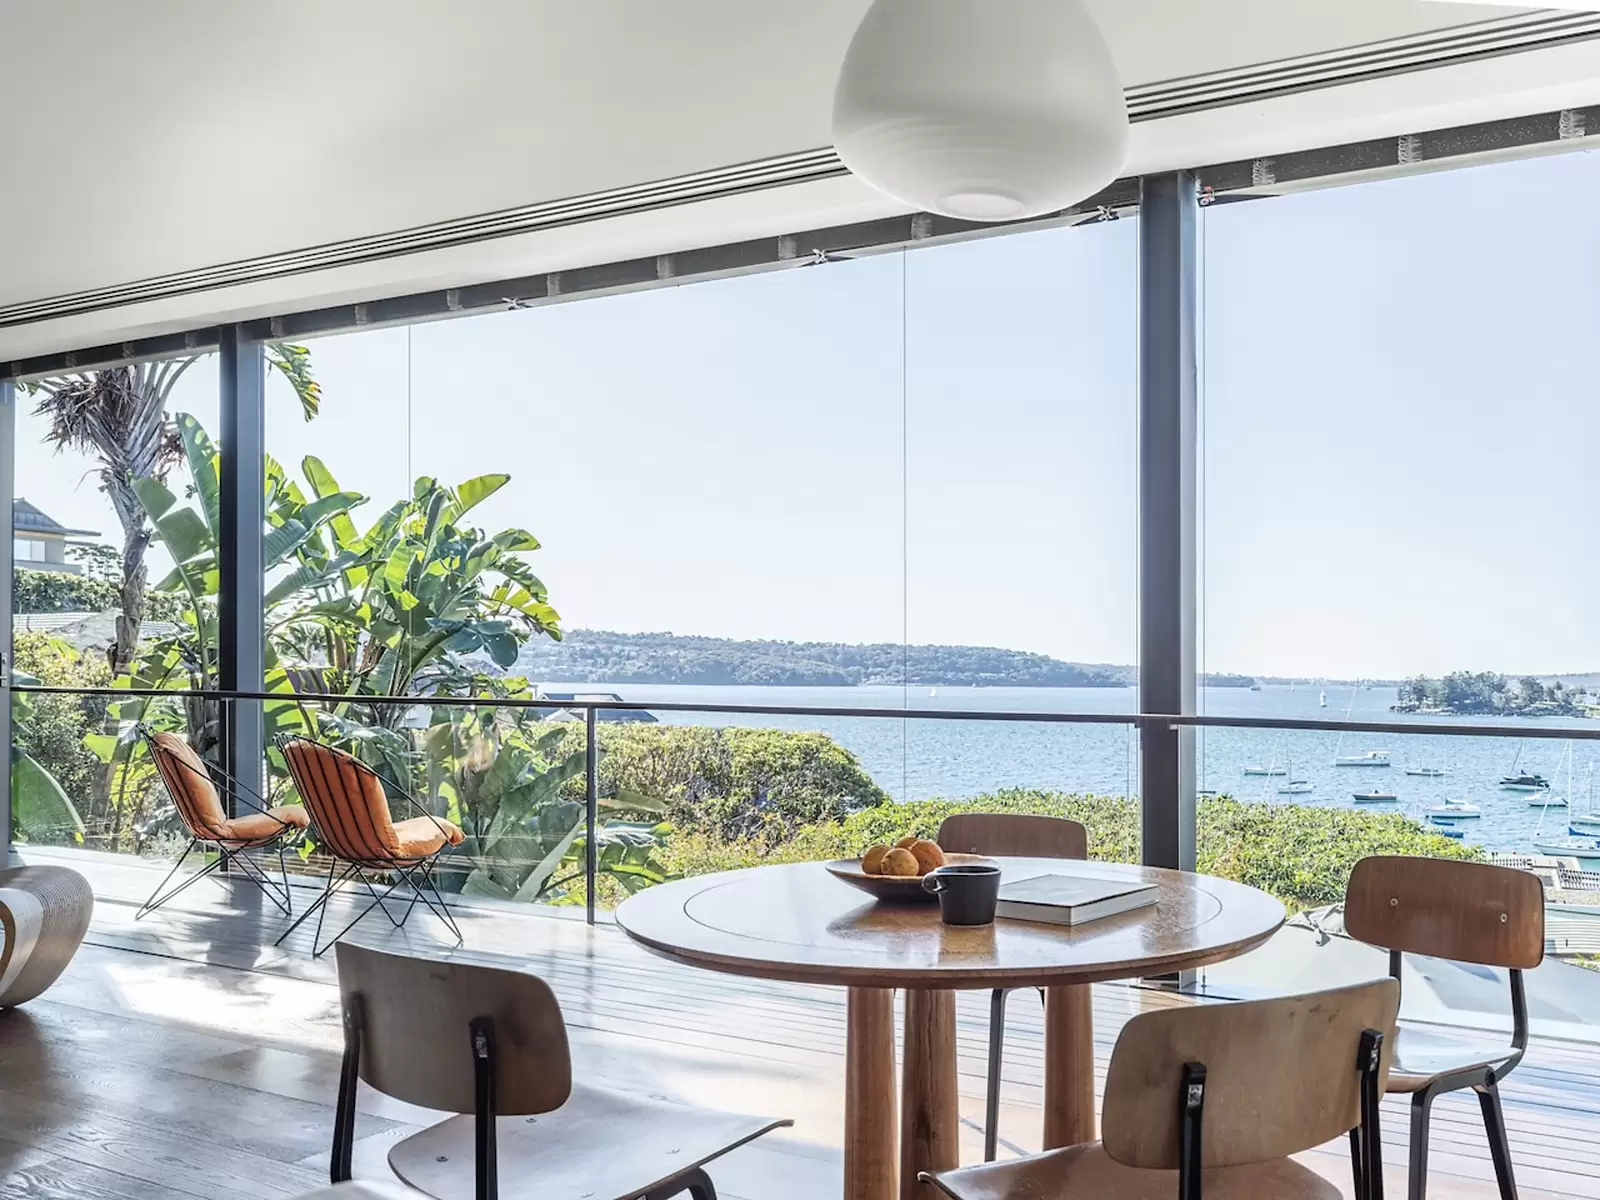 Photo #11: 99 Wolseley Road, Point Piper - For Sale by Sydney Sotheby's International Realty